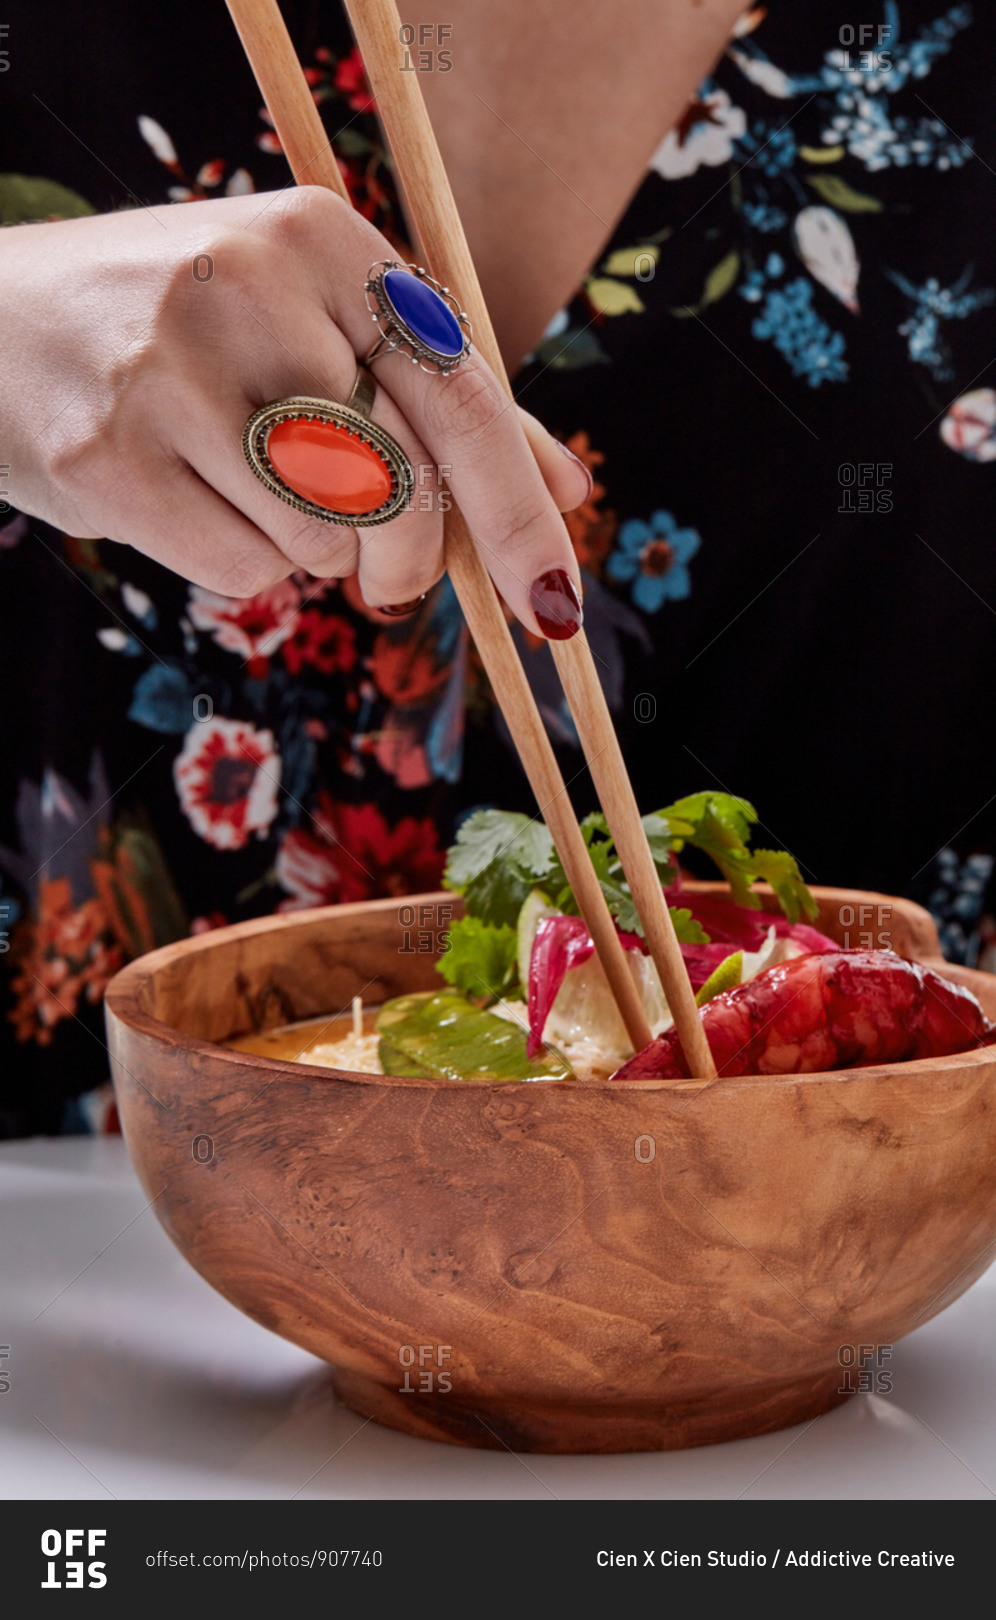 Crop hand with stylish orange and blue rings of faceless woman holding wooden chopsticks while eating Asian noodle bowl